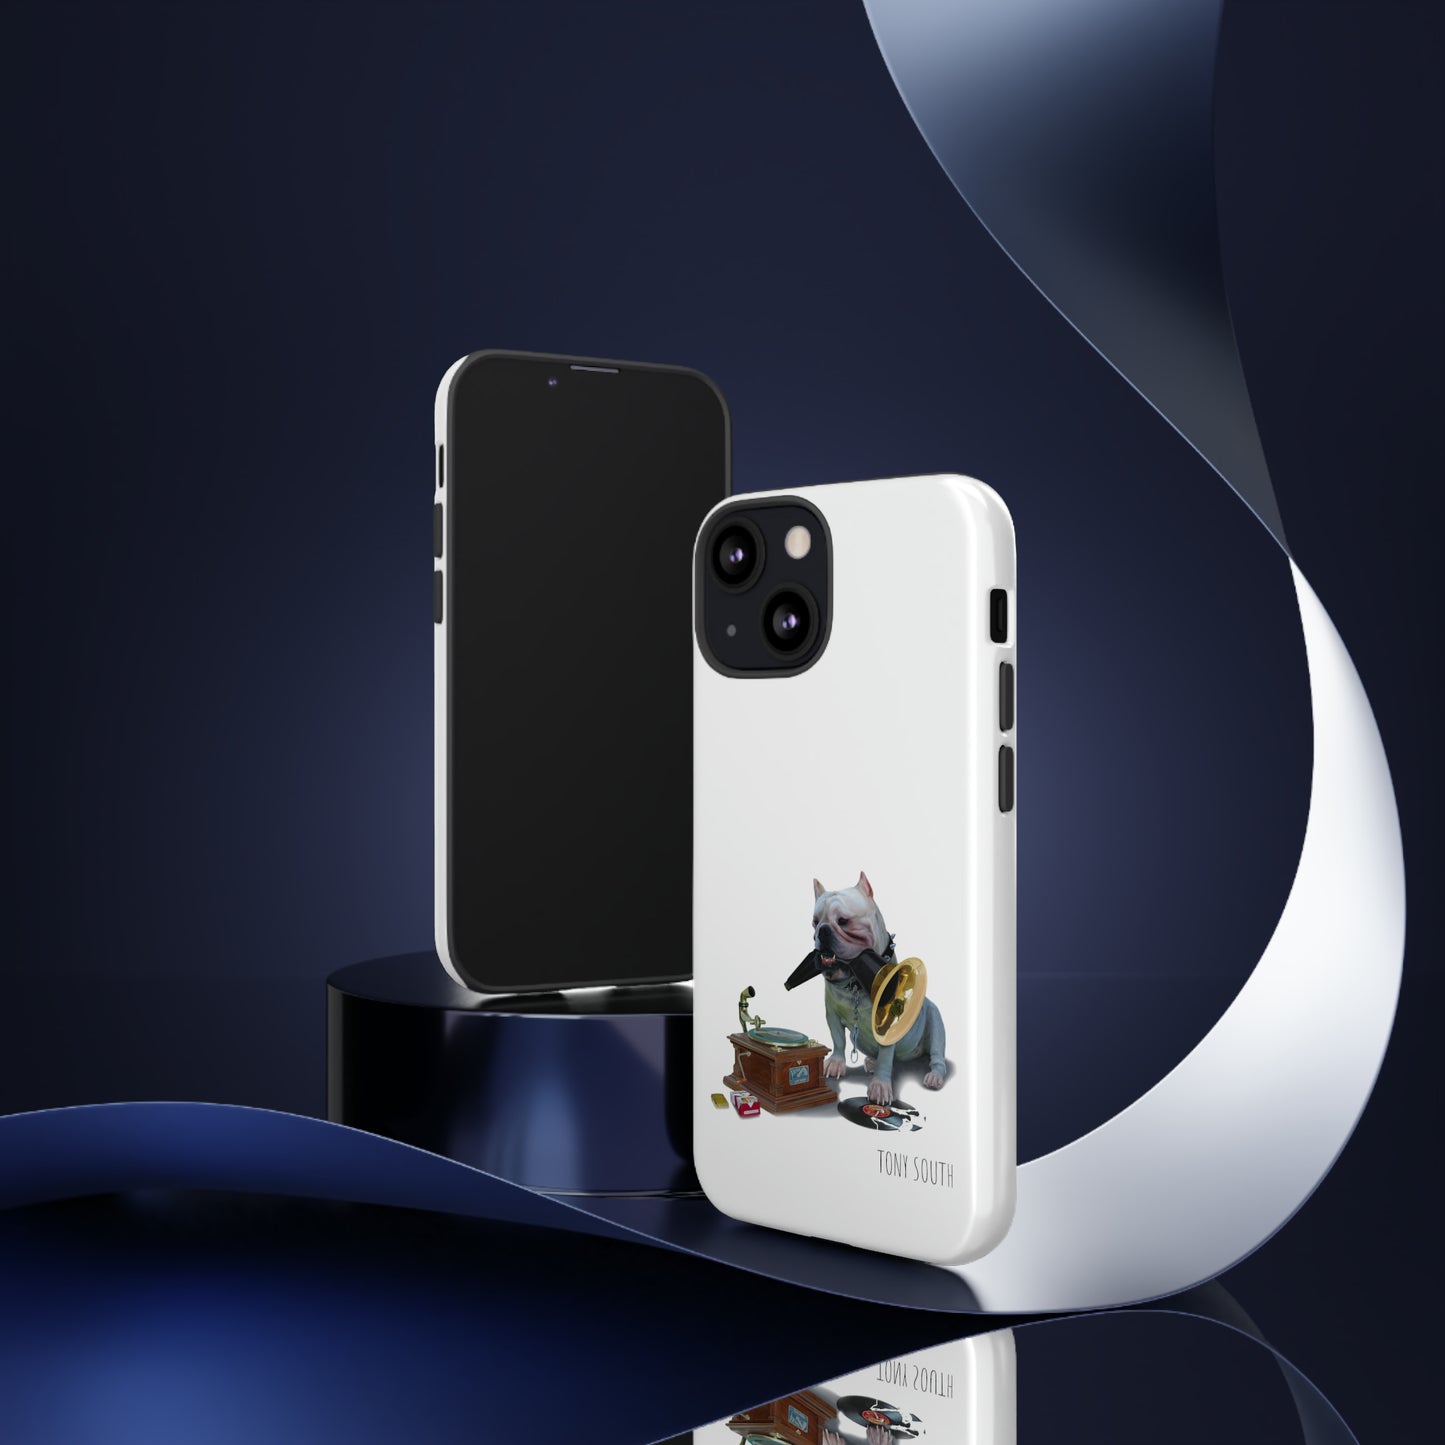 Tony South: "His Master's Voice" - iPhone Tough Cases